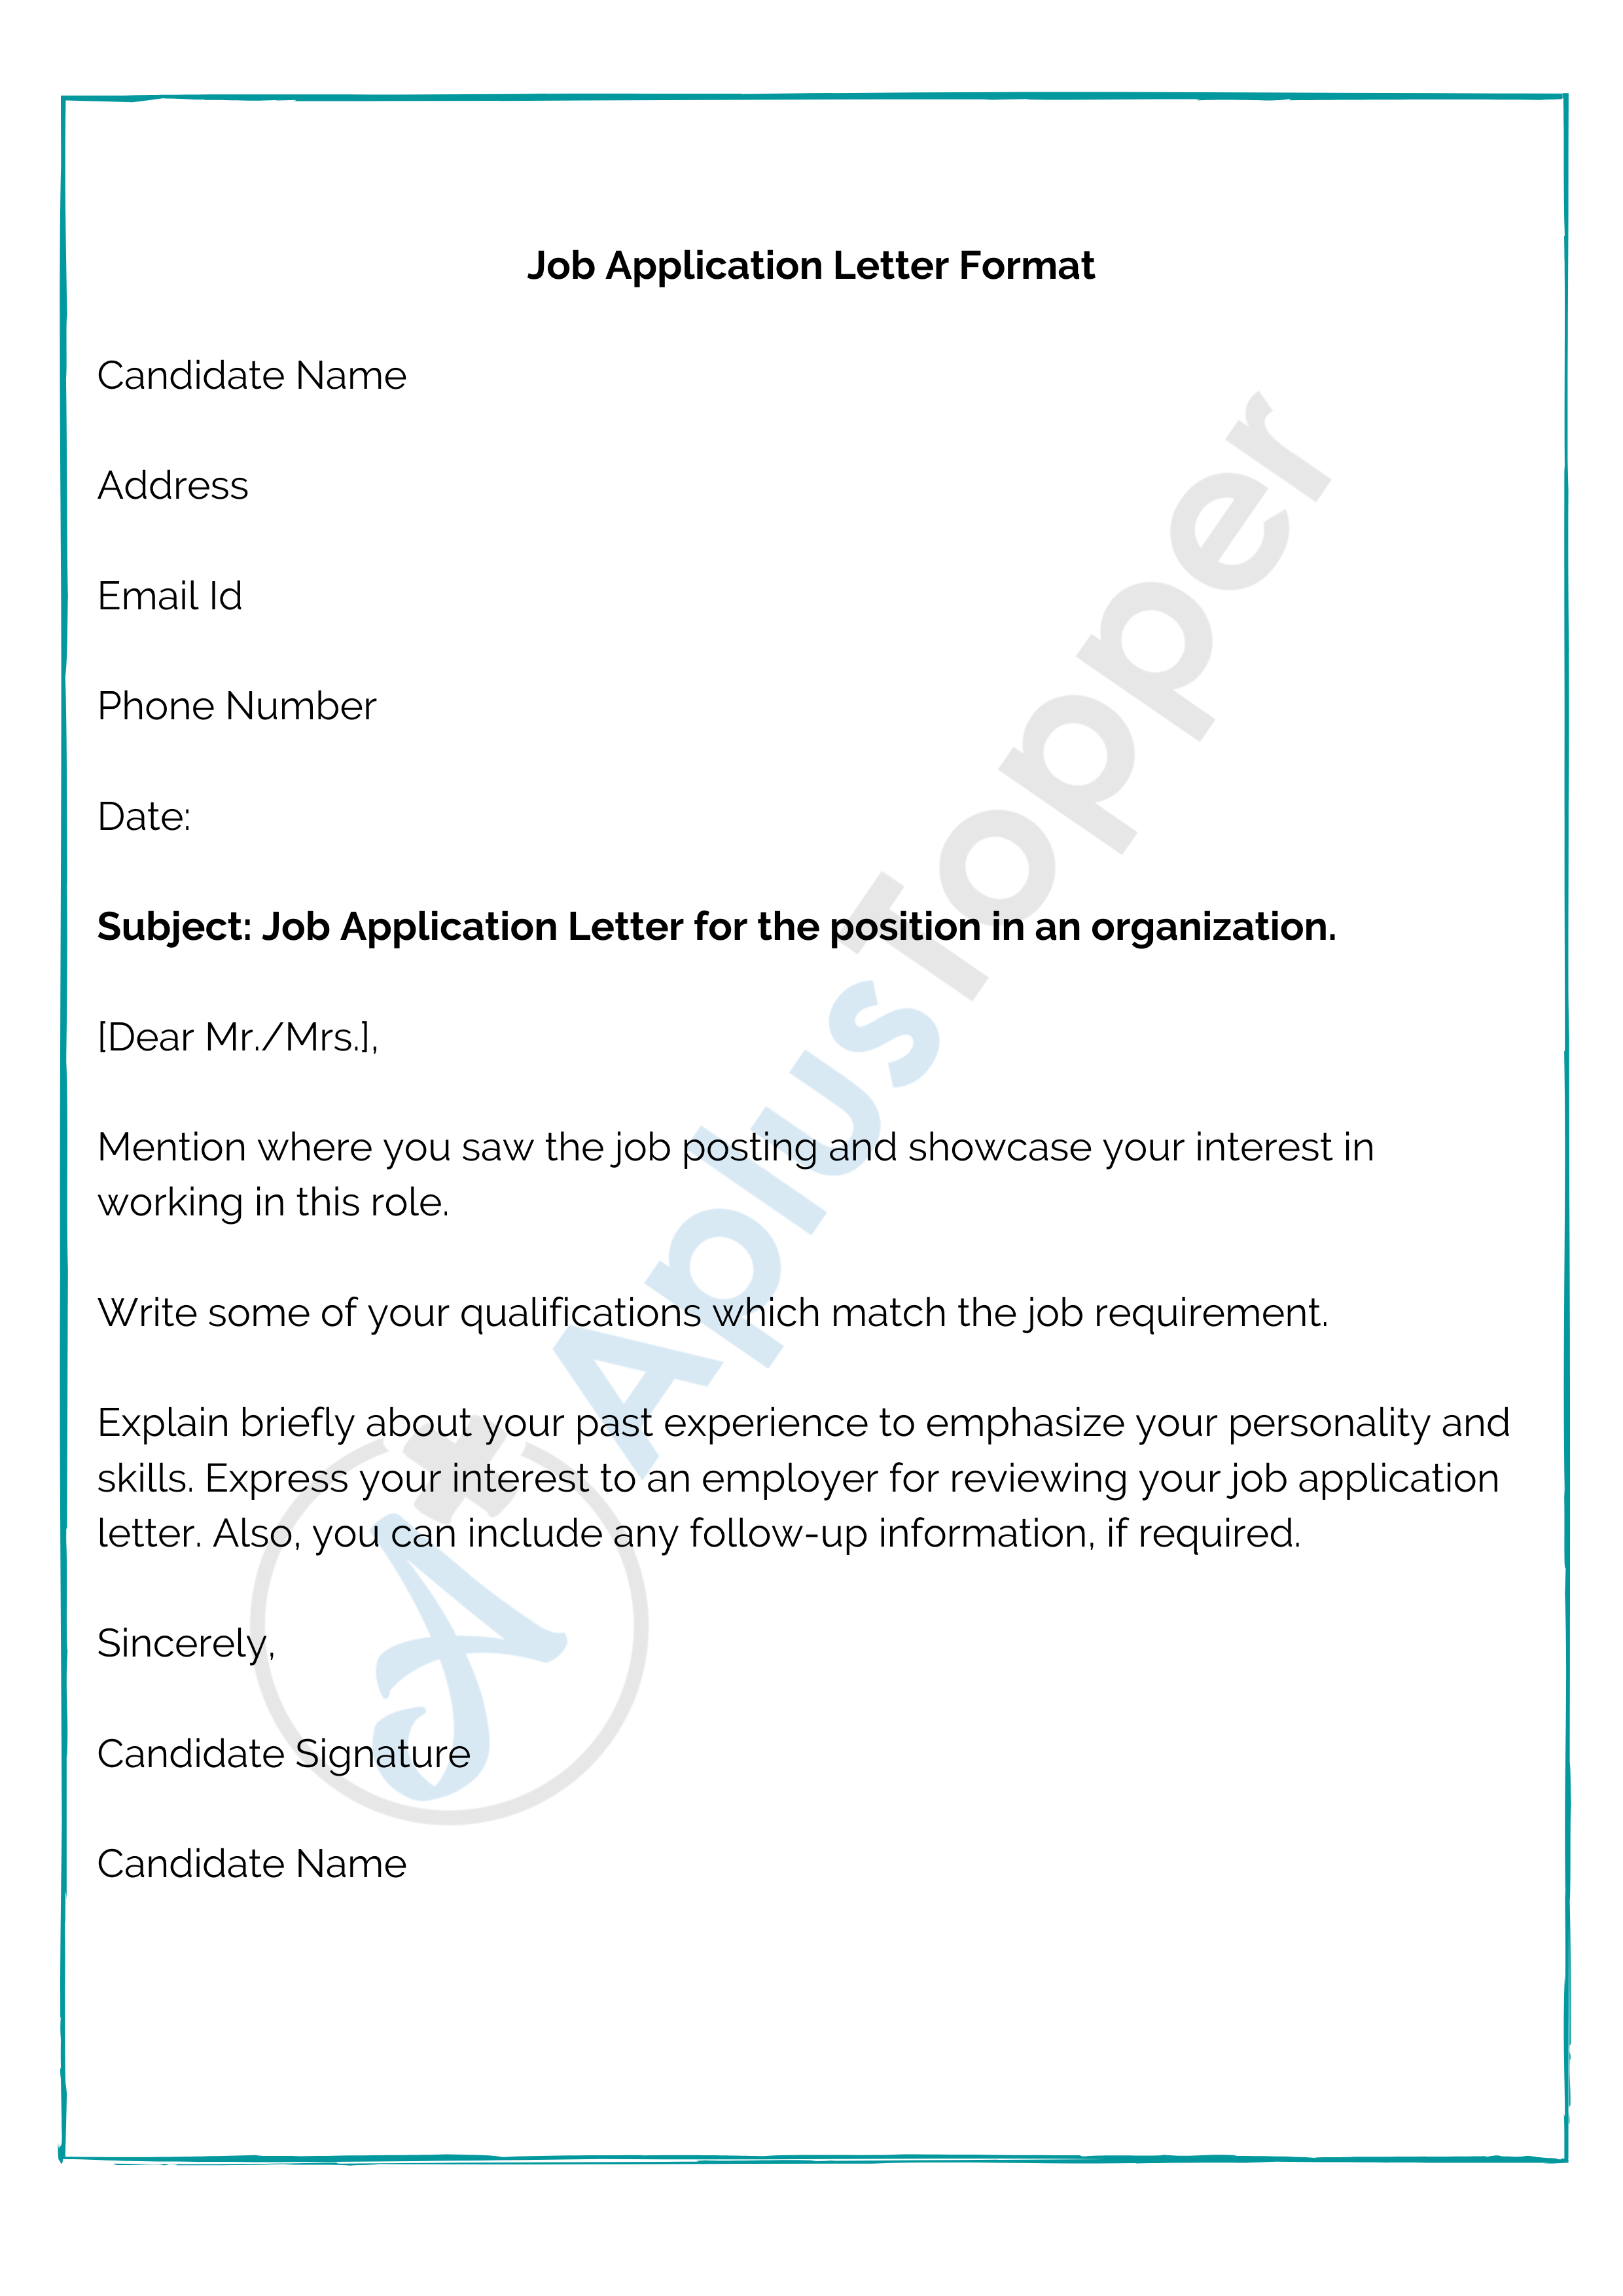 how to write an application letter for a pos work